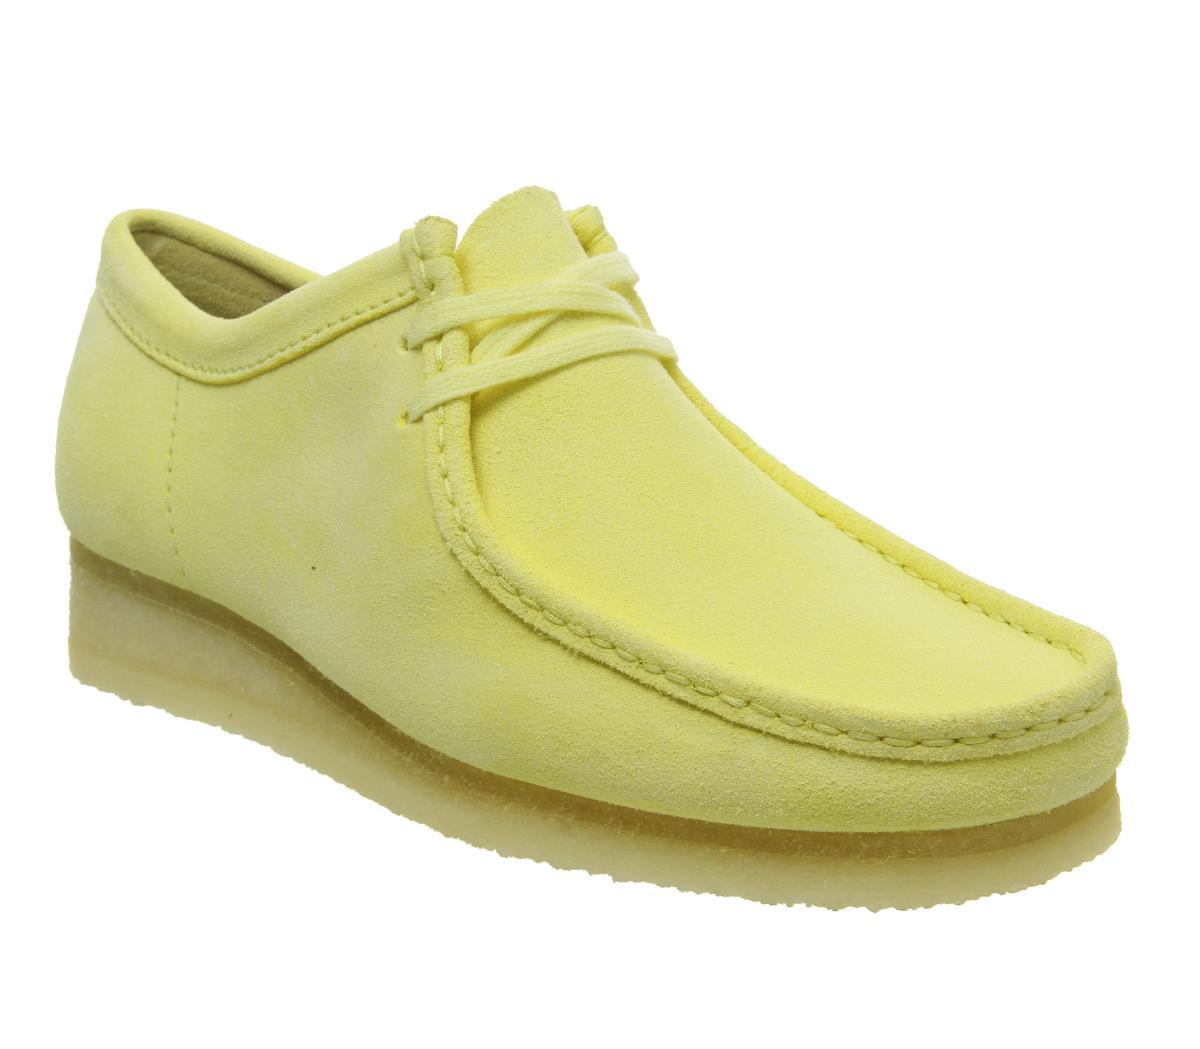 clarks shoes yellow off 77% - online-sms.in